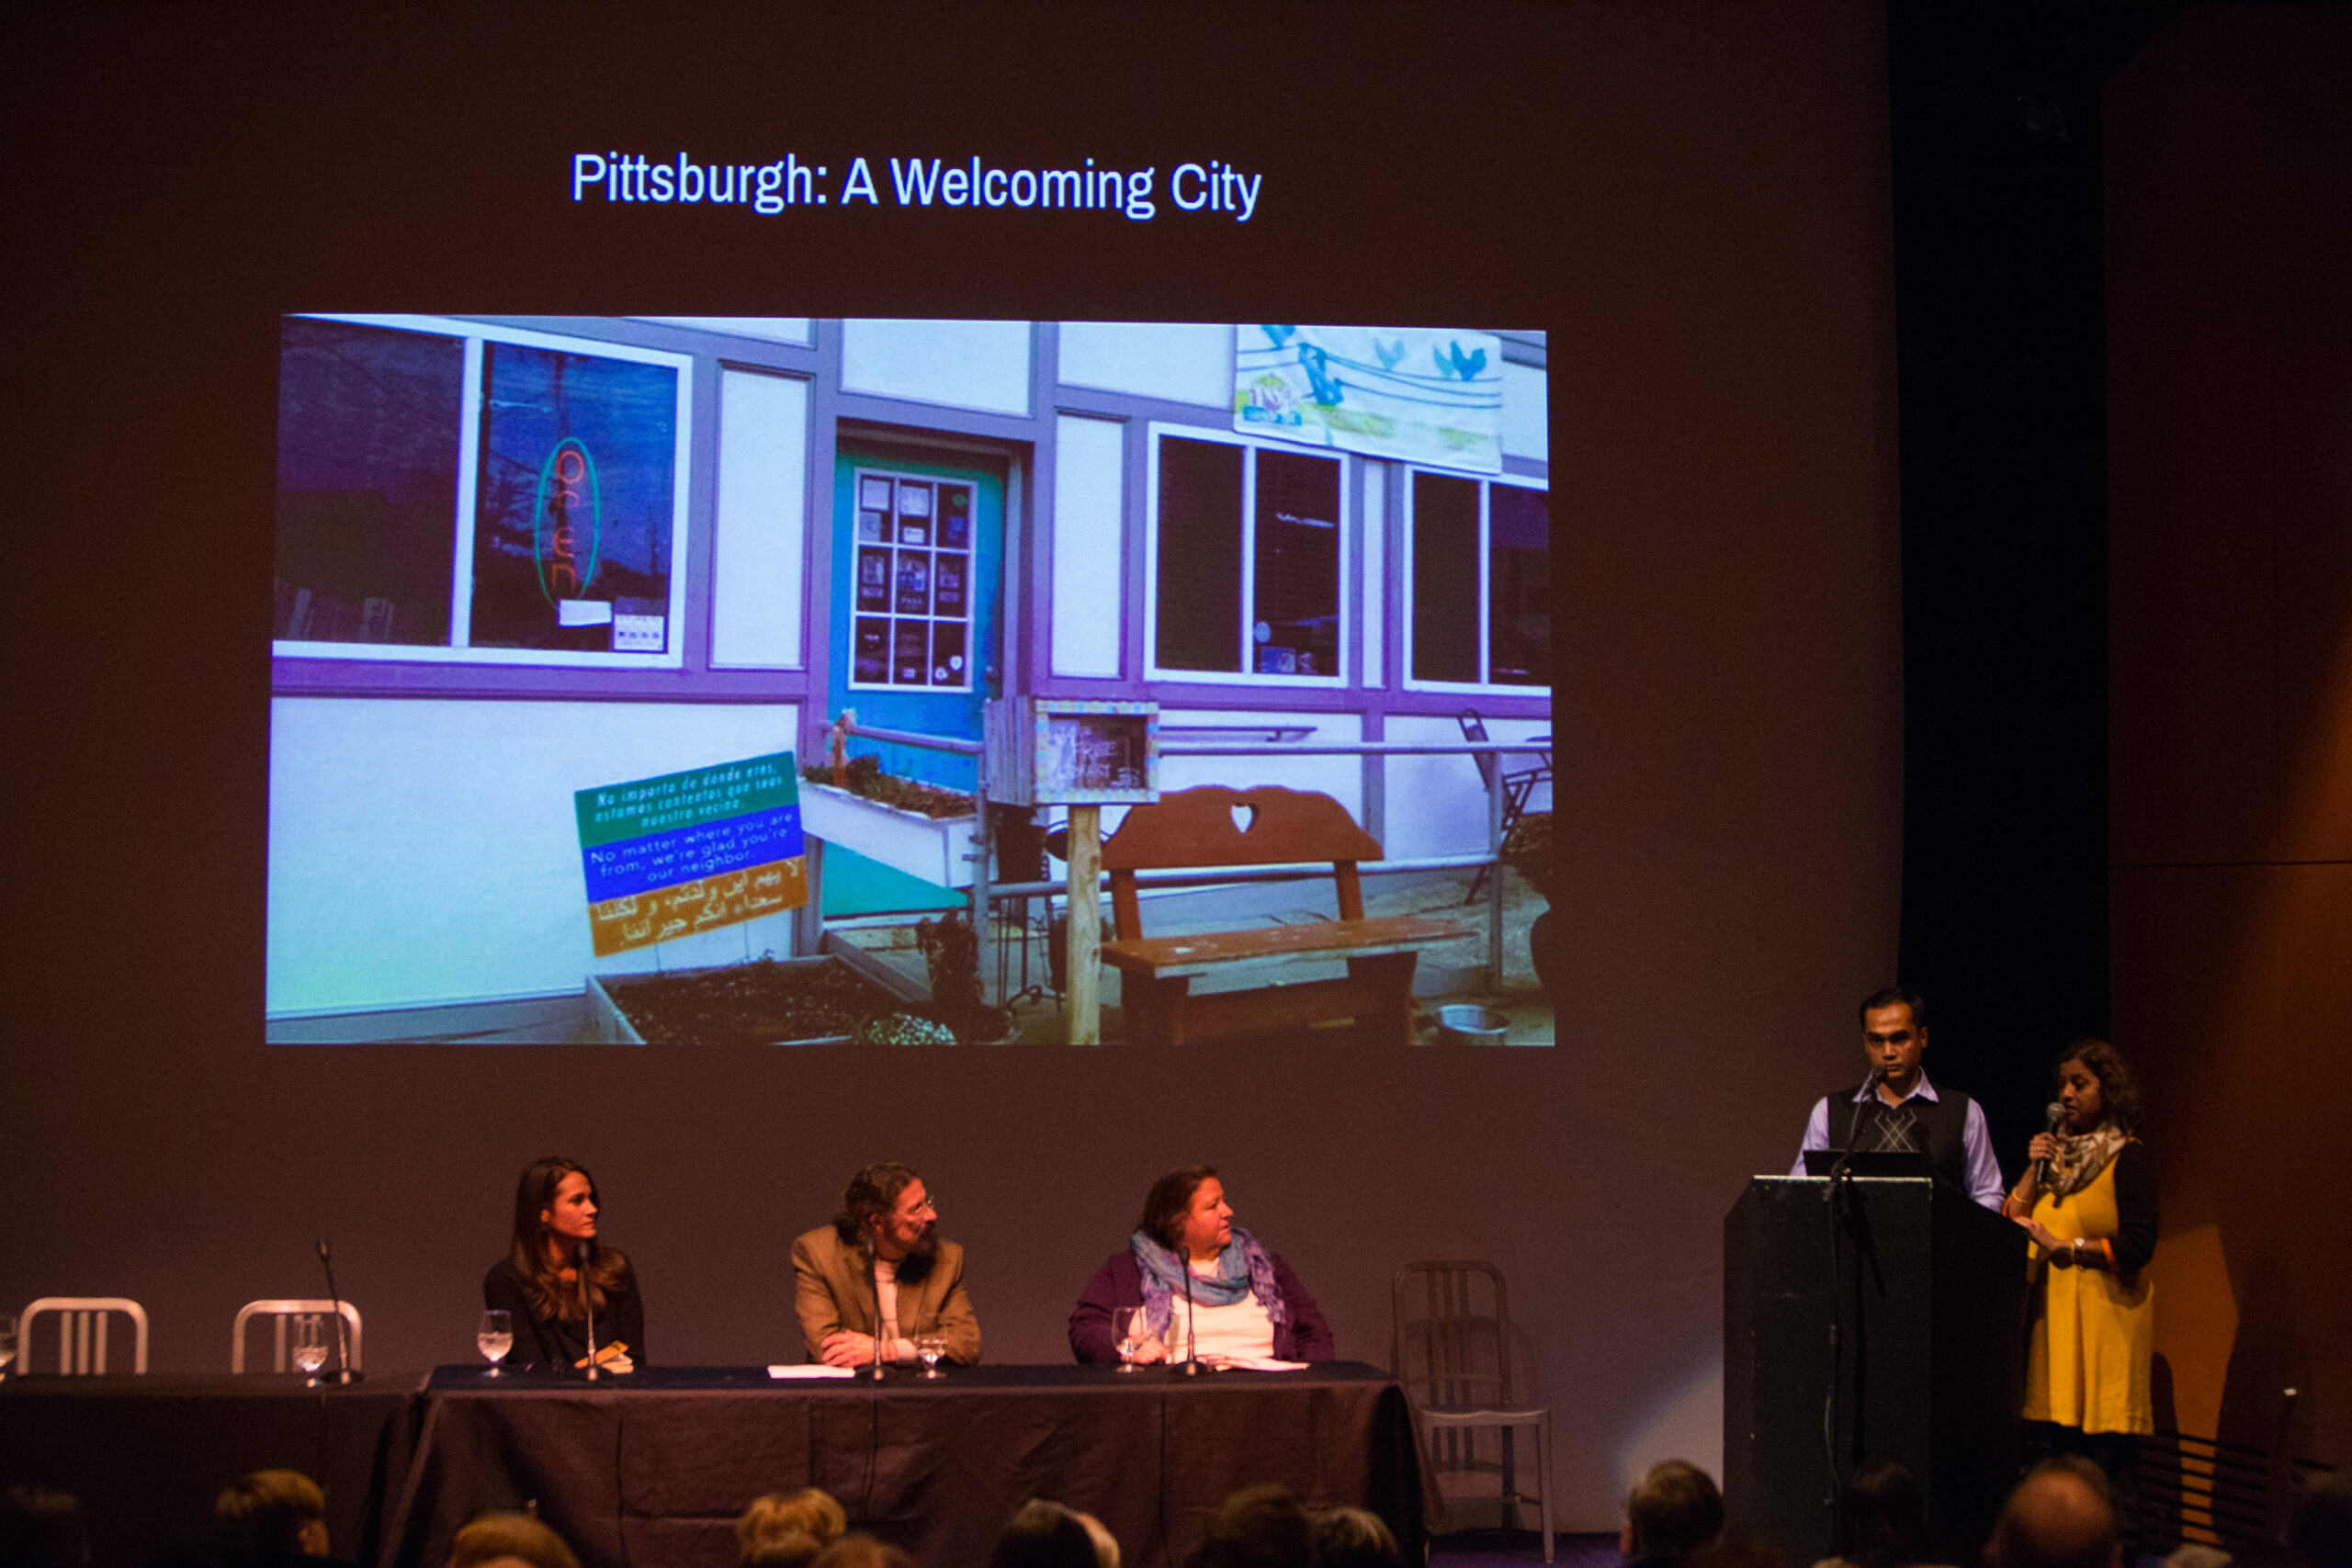 Three panelists sit at a table on the left side of a stage. They look towards two speakers standing behind a lectern to the right. Projected behind them is a photo of a storefront with a green, blue, and yellow sign in front. Above the image is the text Pittsburgh: A Welcoming City.